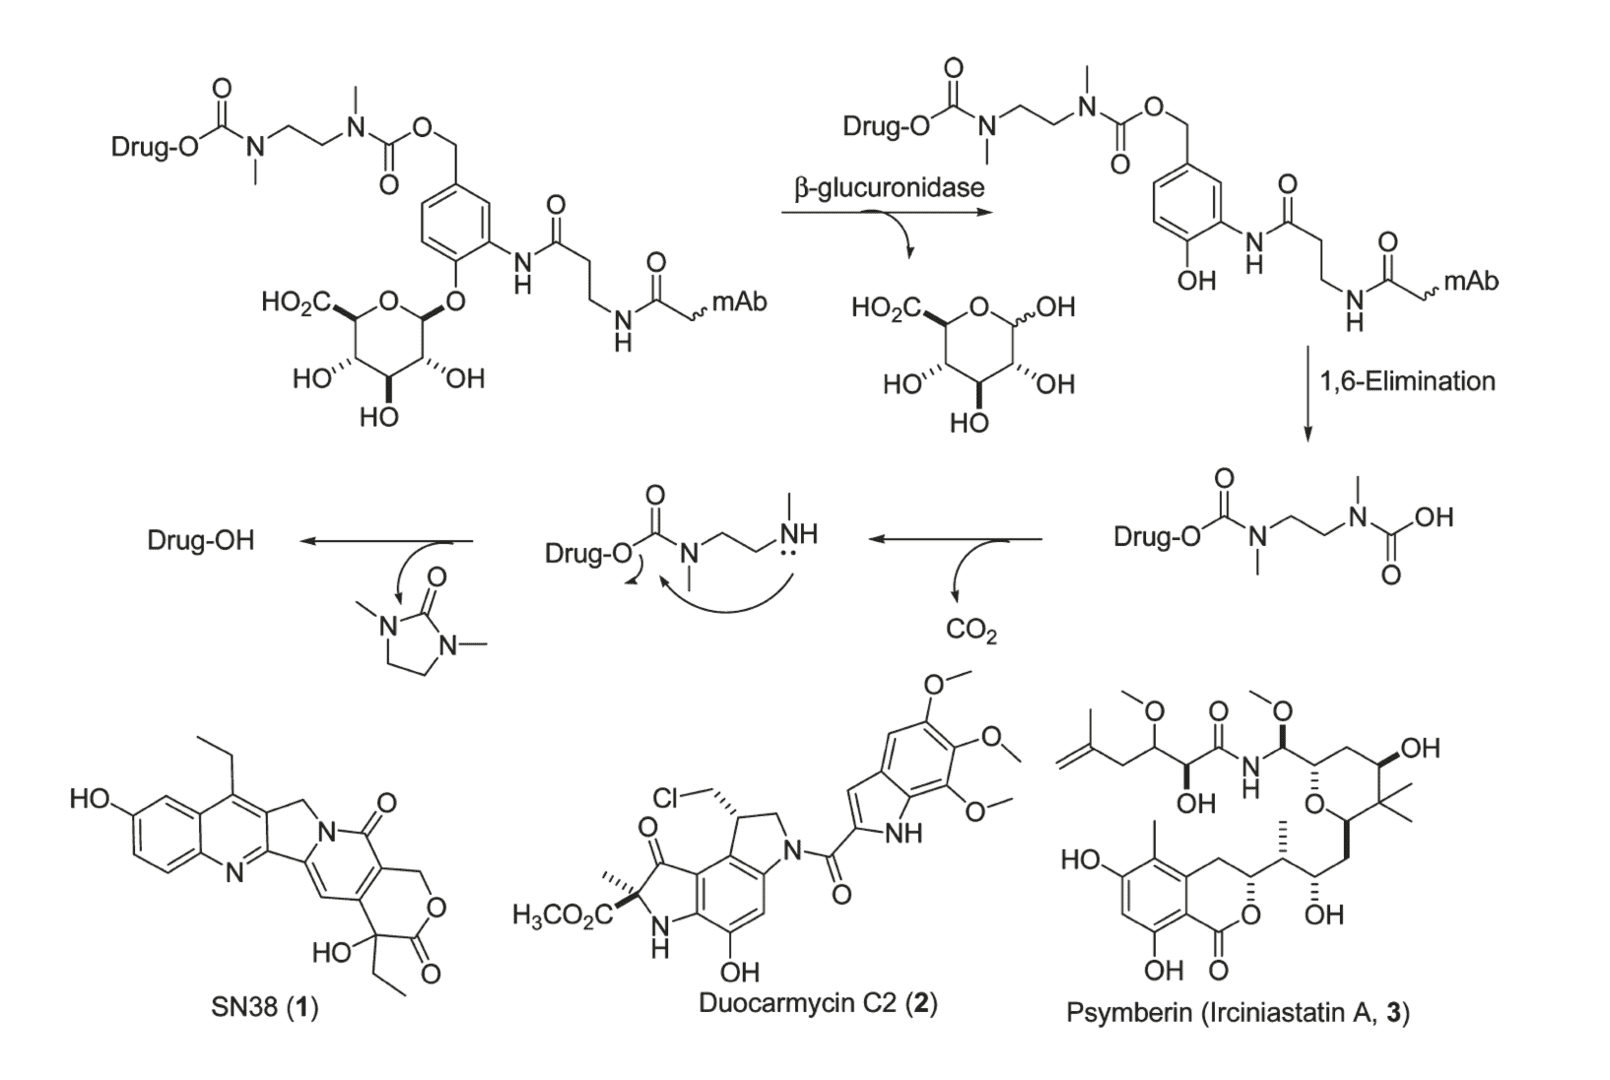  Examples of payload drugs for ADC  development using β-Glucuronide linkers and their release mechanism after β-glucuronidase hydrolysis (ACS Med. Chem. Lett., 2010).